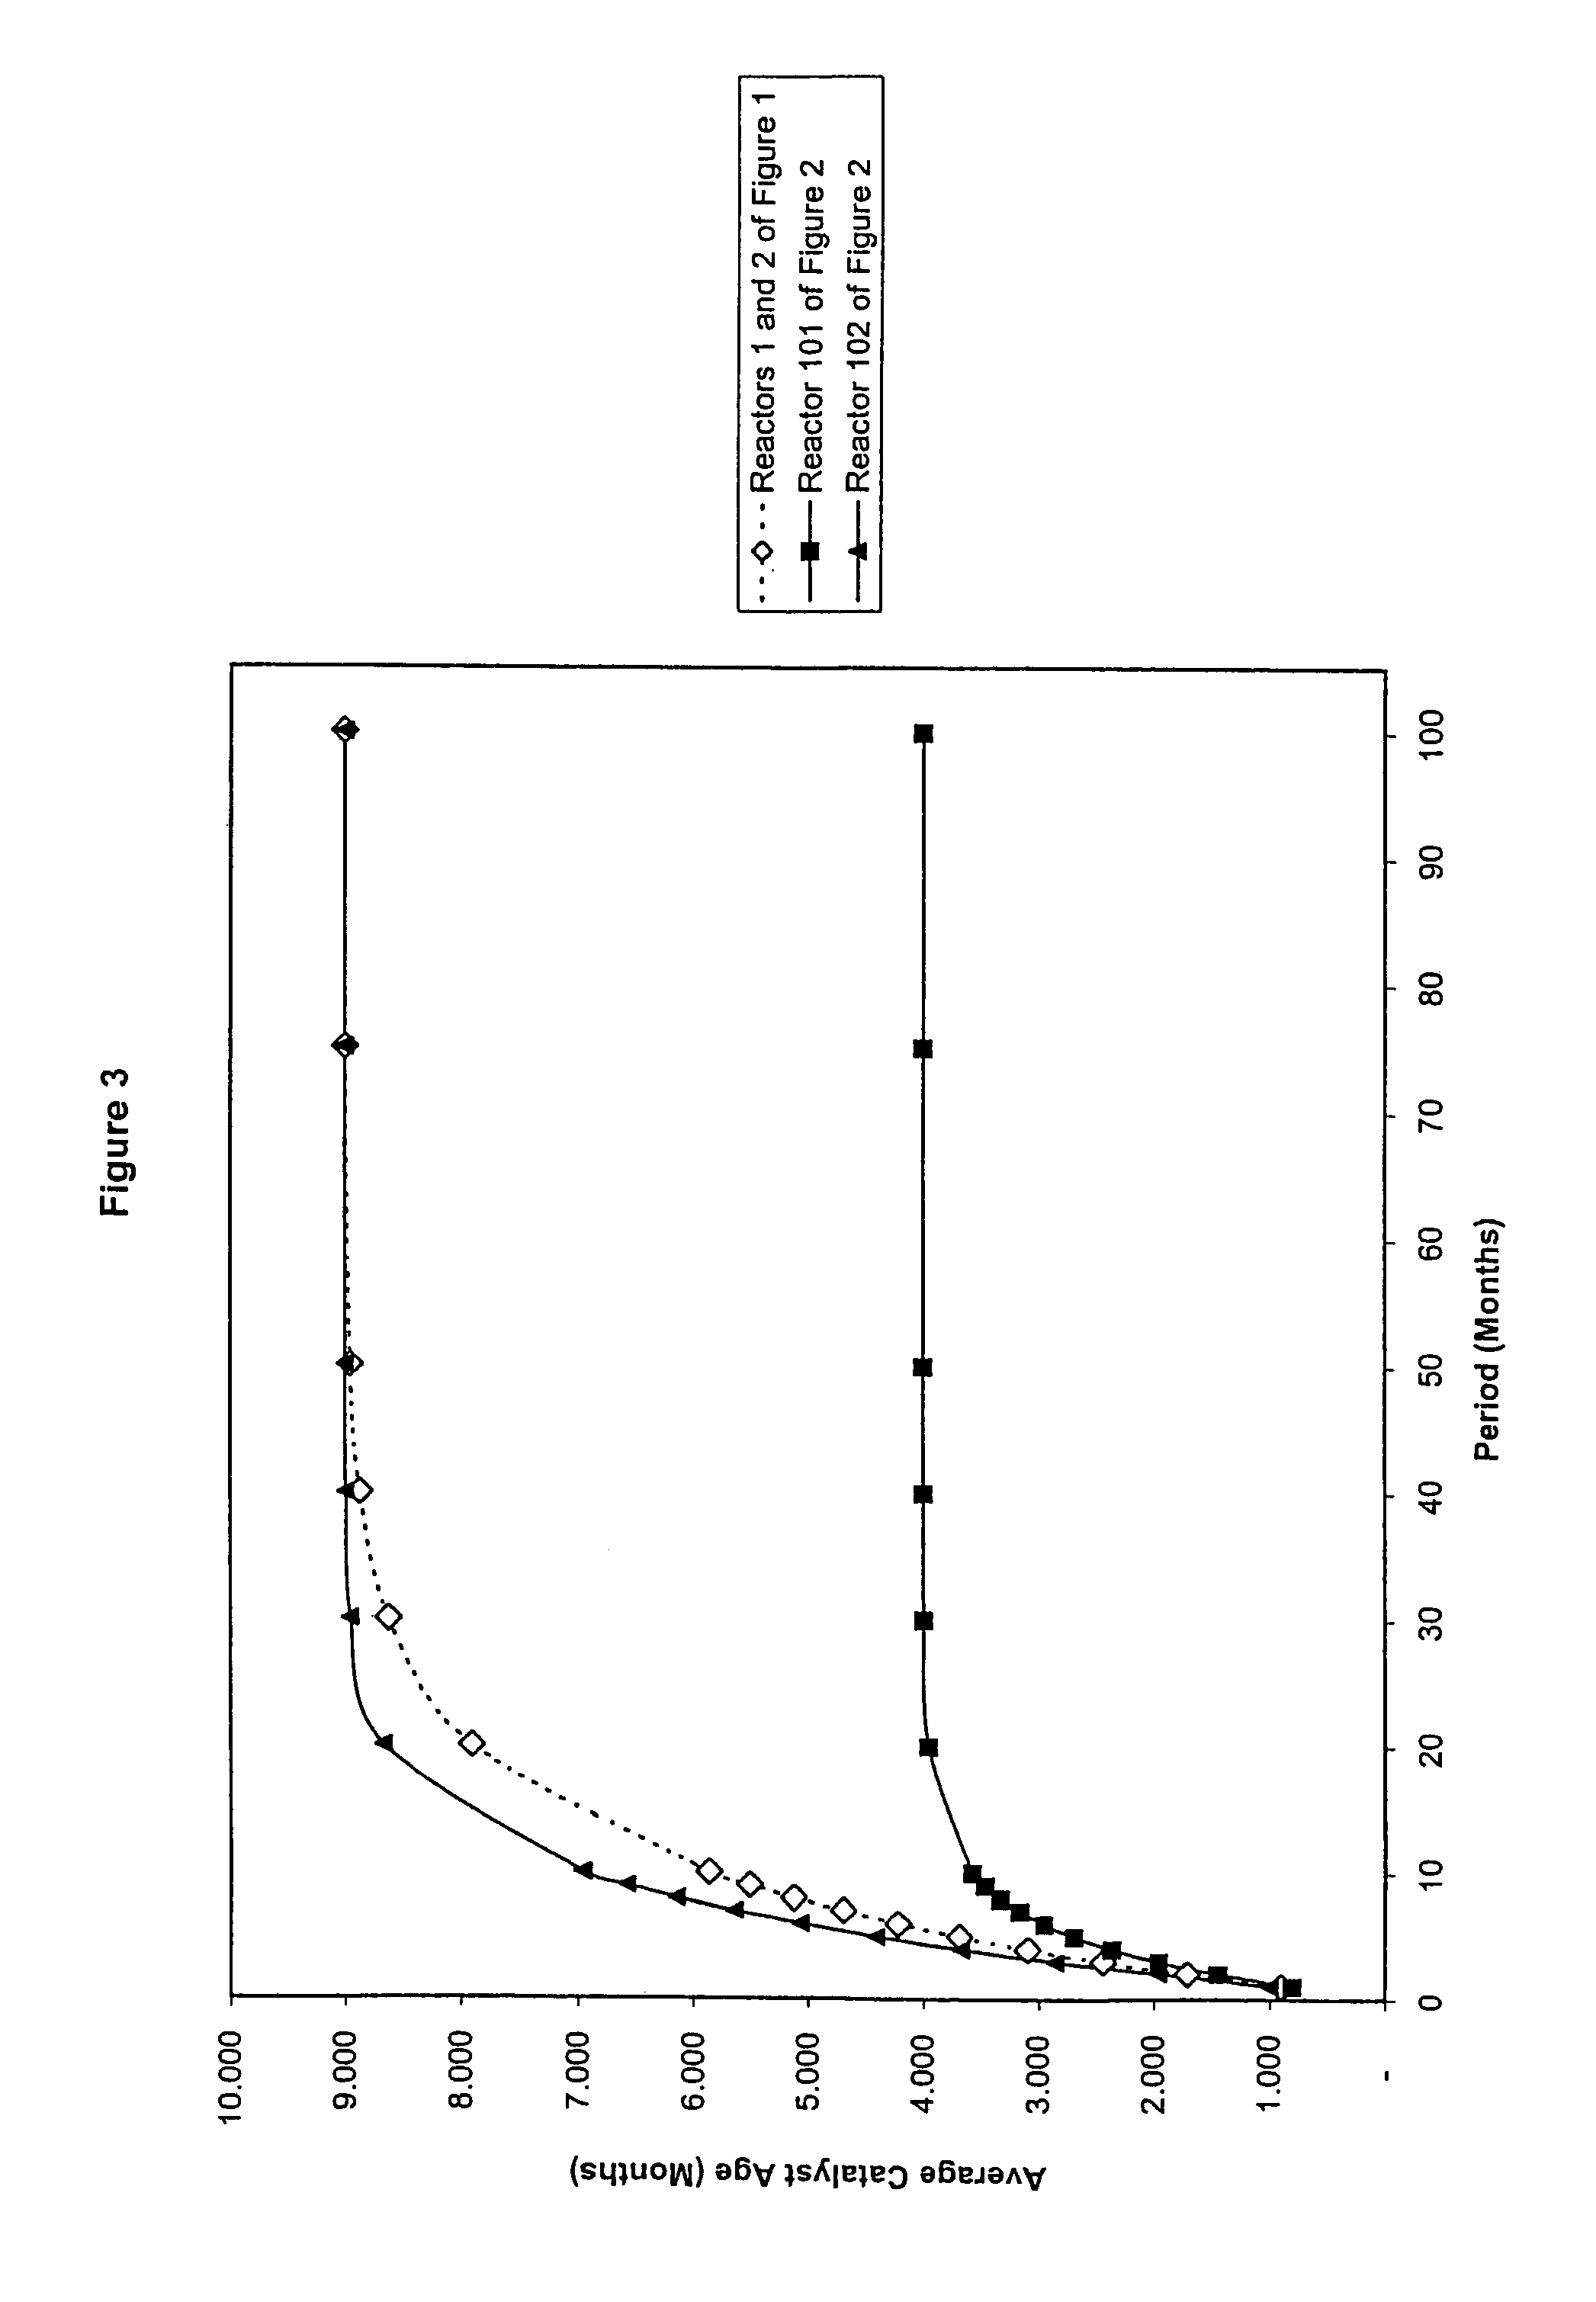 Method of removing and replacing catalyst in a multi-reactor cascade configuration